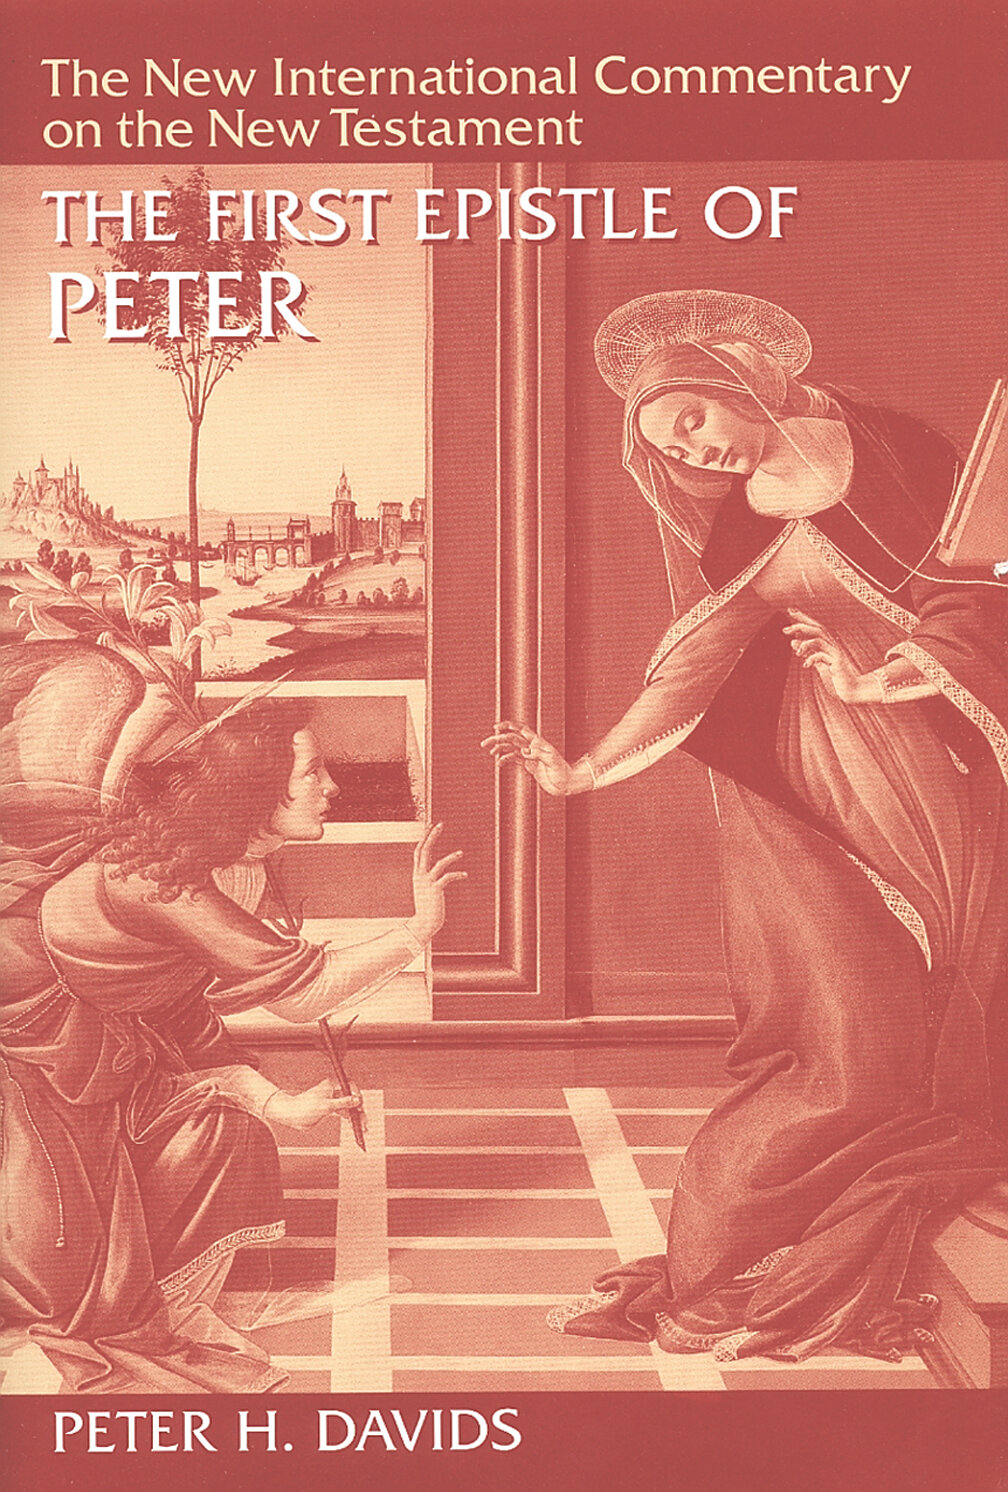 The First Epistle of Peter (The New International Commentary on the New Testament | NICNT)